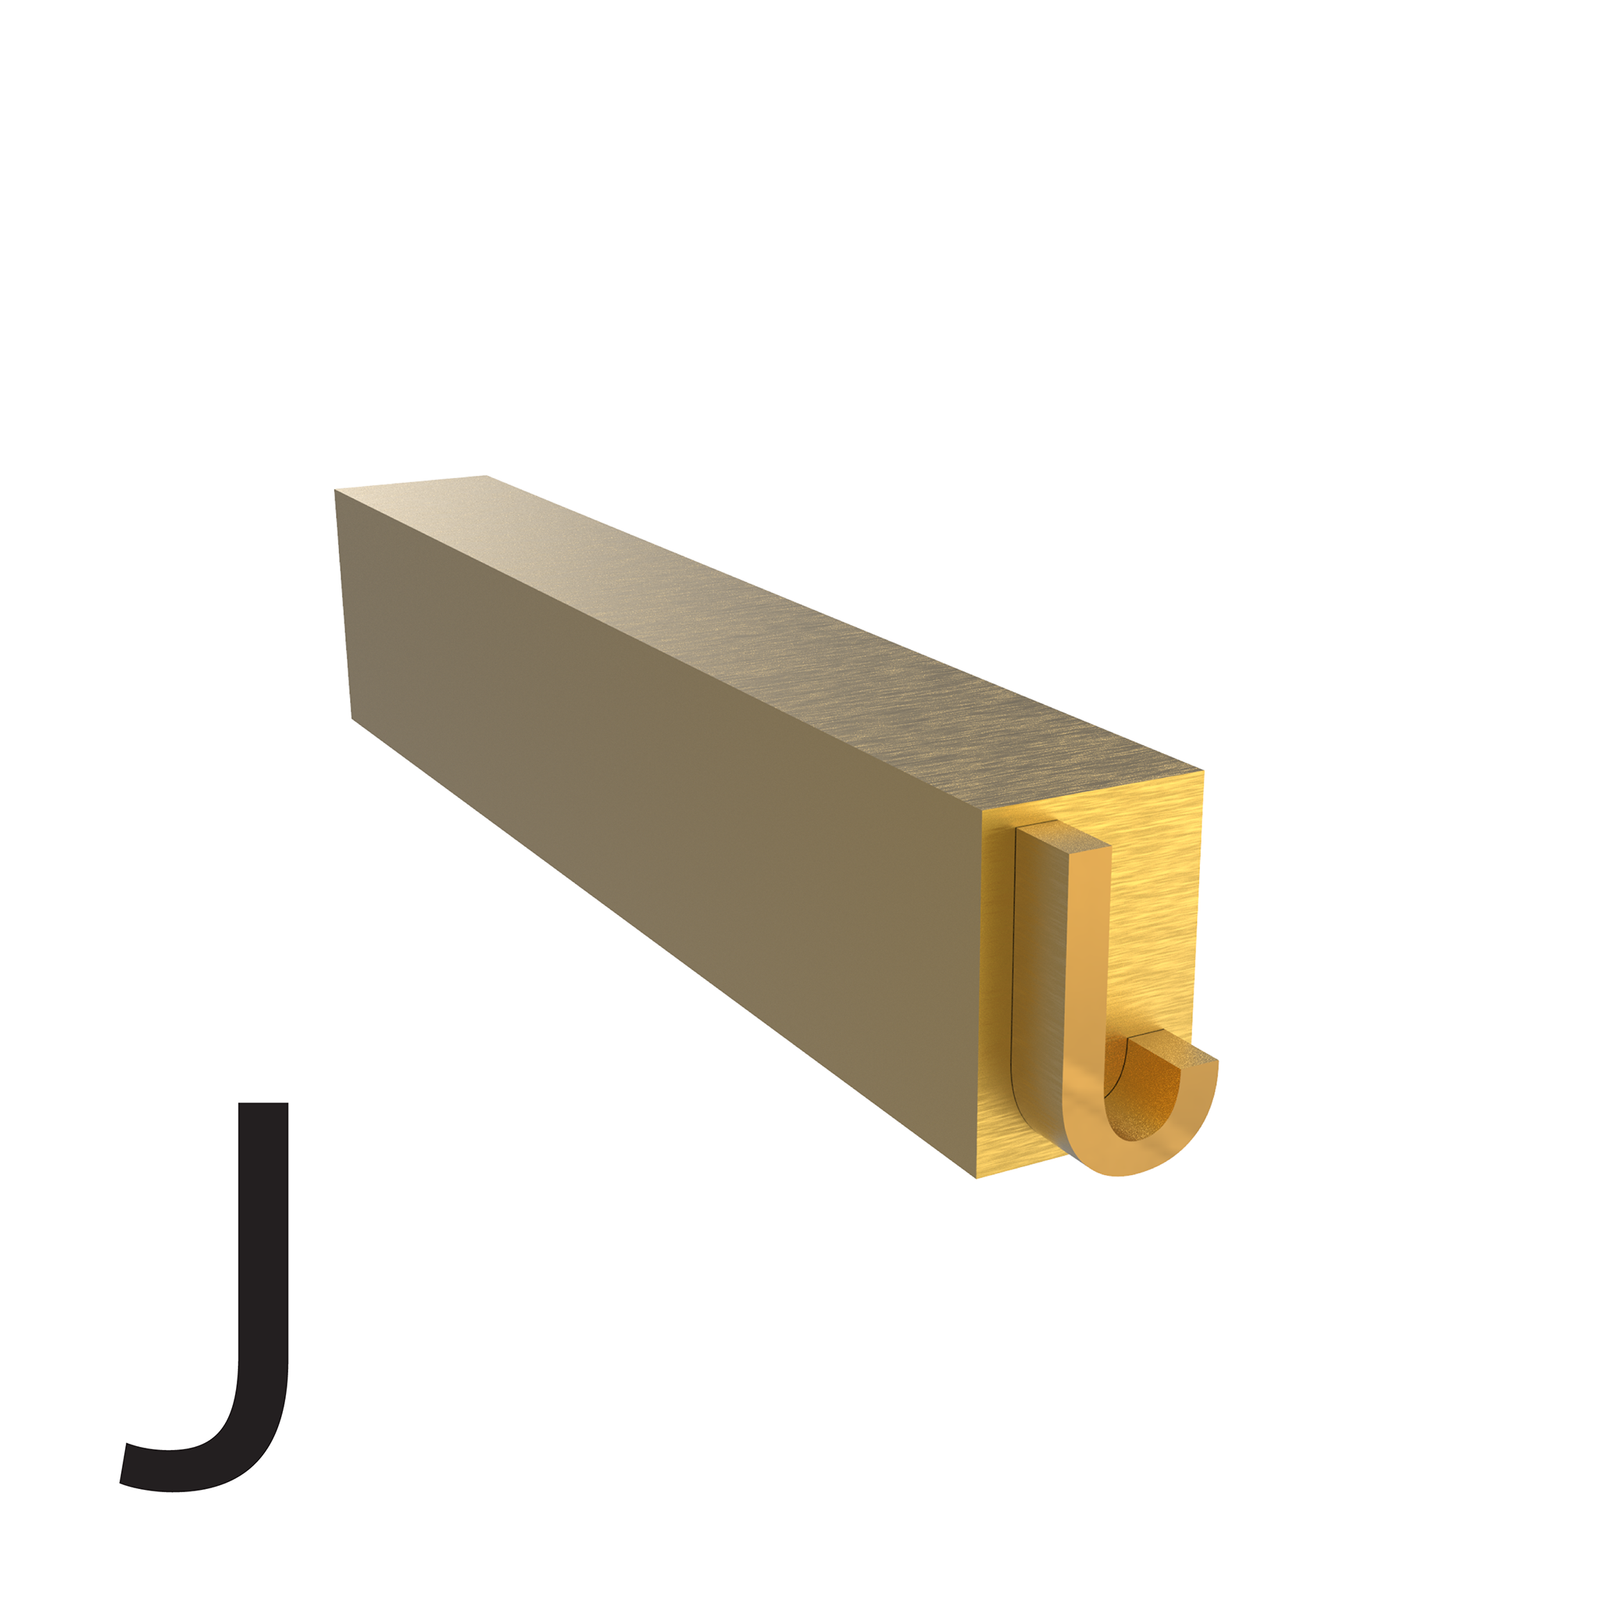 4mm hot stamp letter J type used for coders and printers